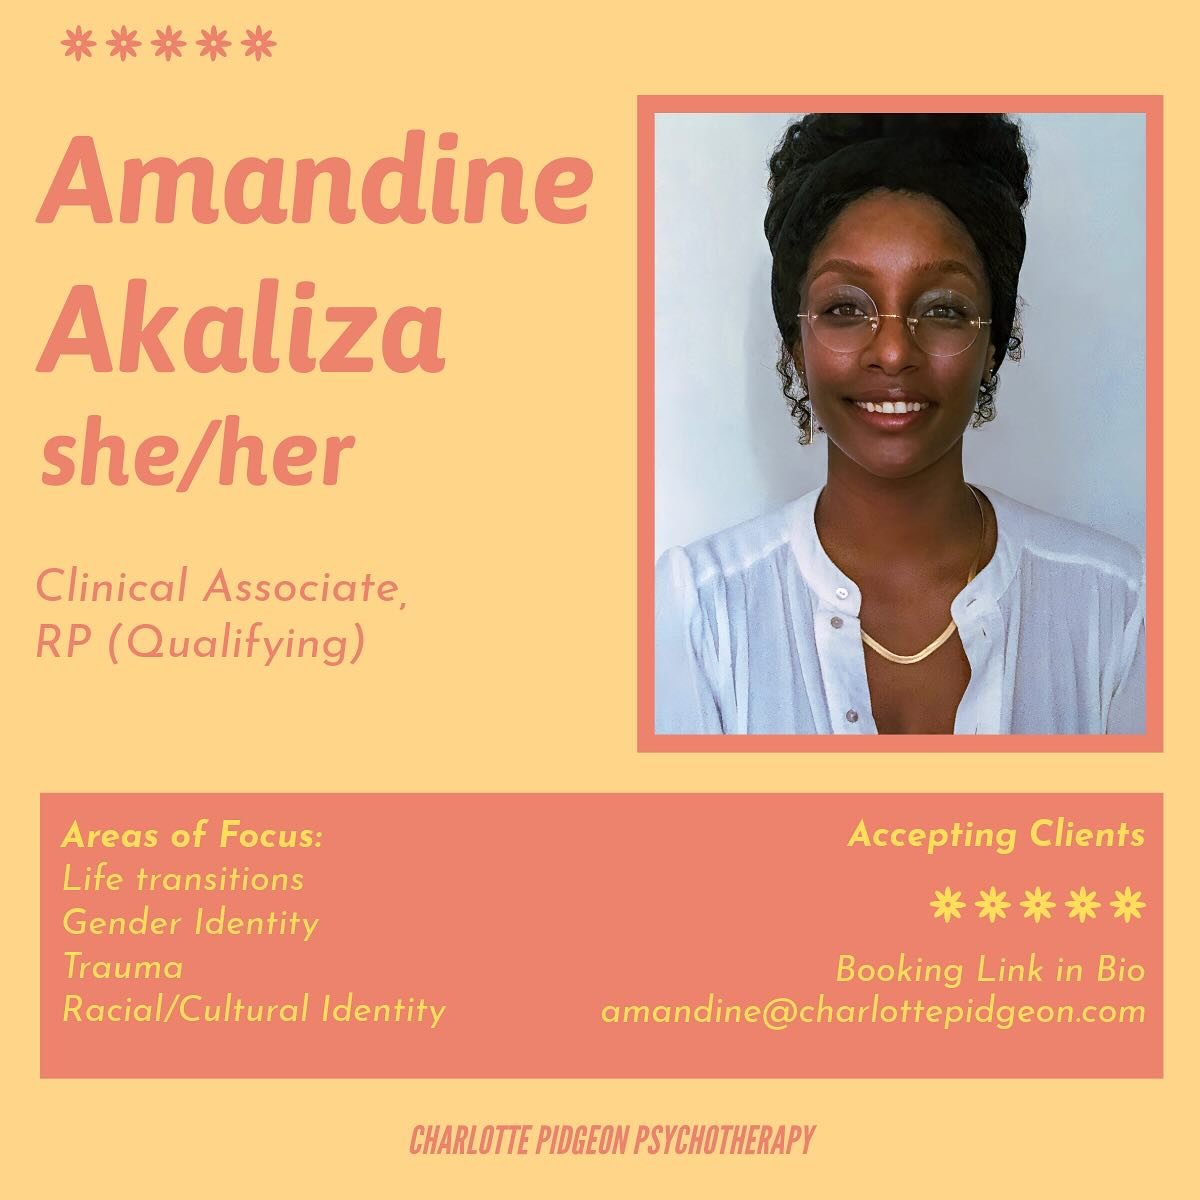 Reintroducing Amandine! Amandine recently finished her practicum, and is now joining us as a Clinical Associate! We can&rsquo;t wait to have her officially join us, and to celebrate, we&rsquo;re offering anyone who books with Amandine before May 17 a